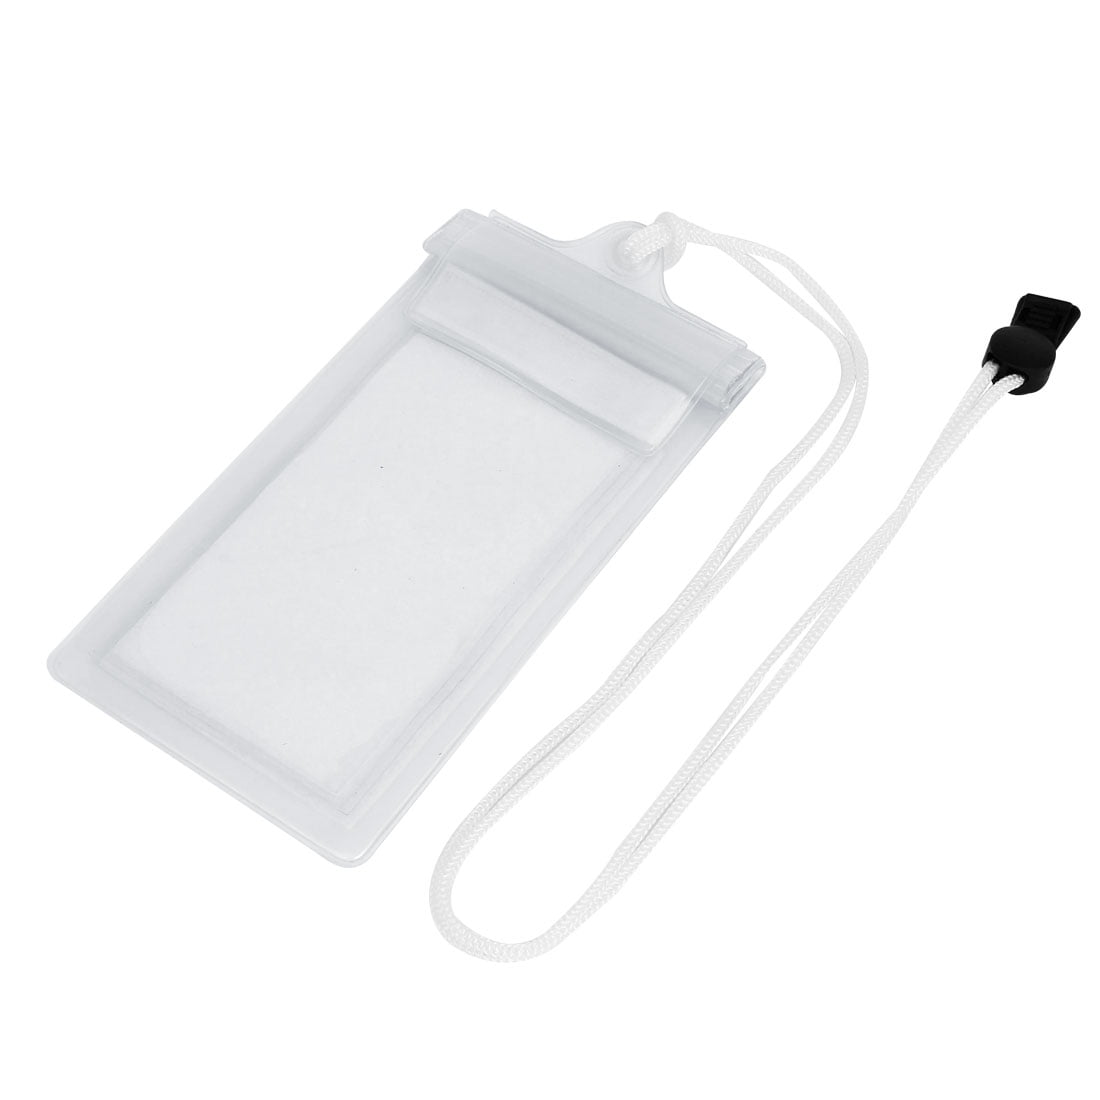 Waterproof Clear Pouch Bag Case for 4.5 Cell Phone w Neck Strap - 0